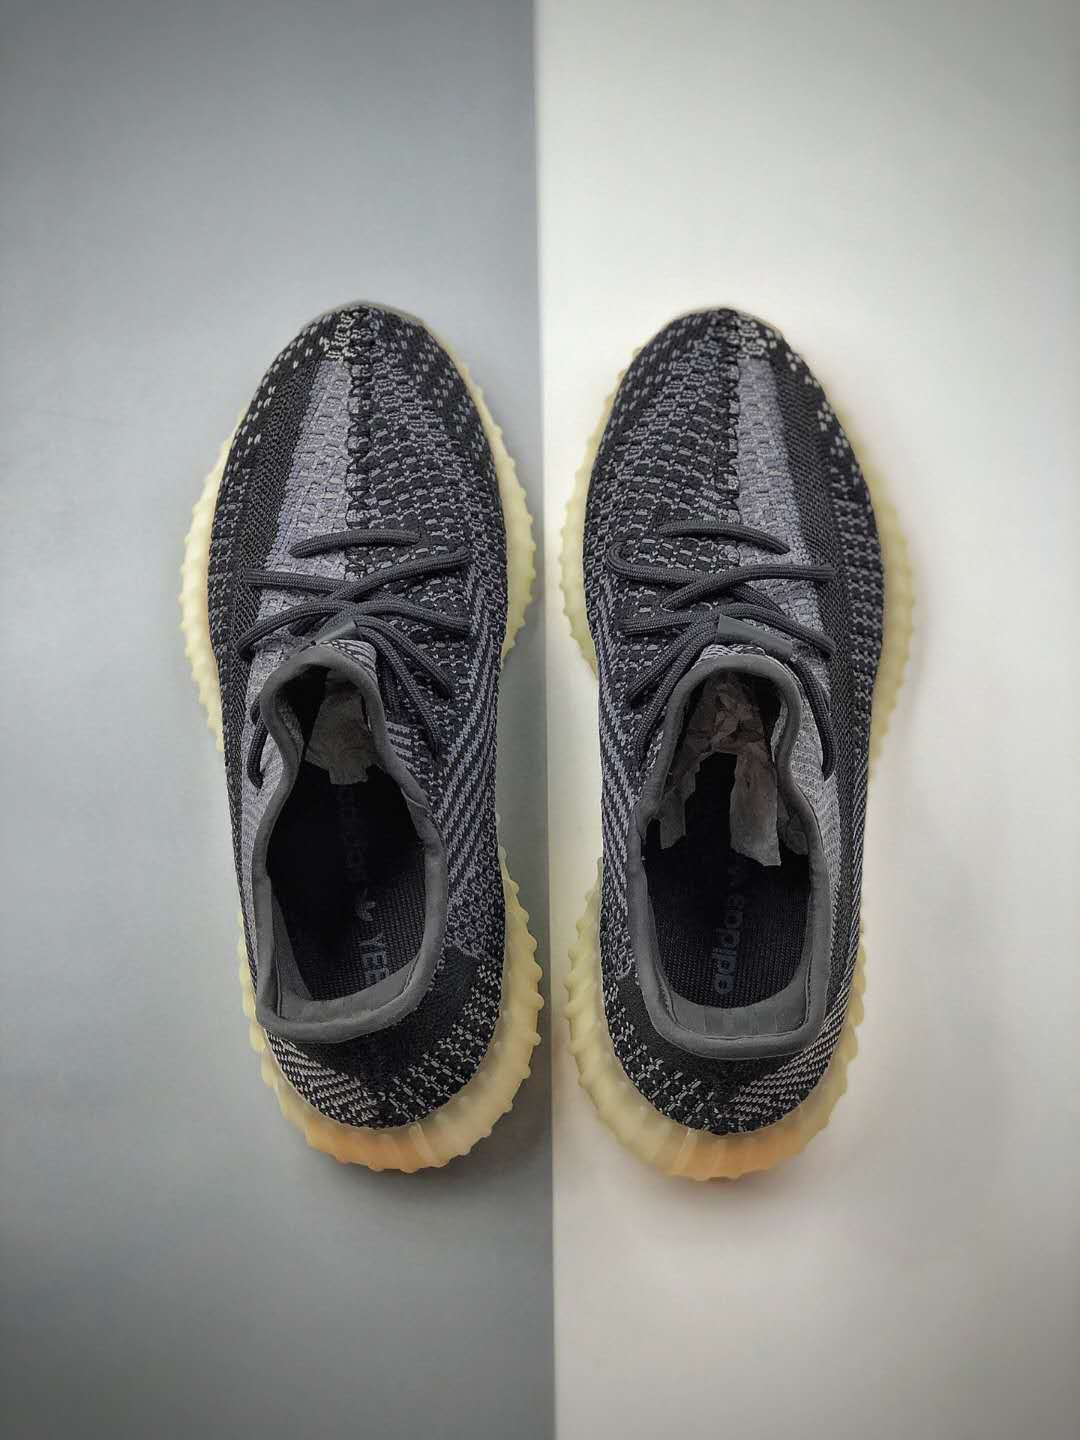 Adidas Yeezy Boost 350 V2 'Carbon' FZ5000 - Shop the Latest Release